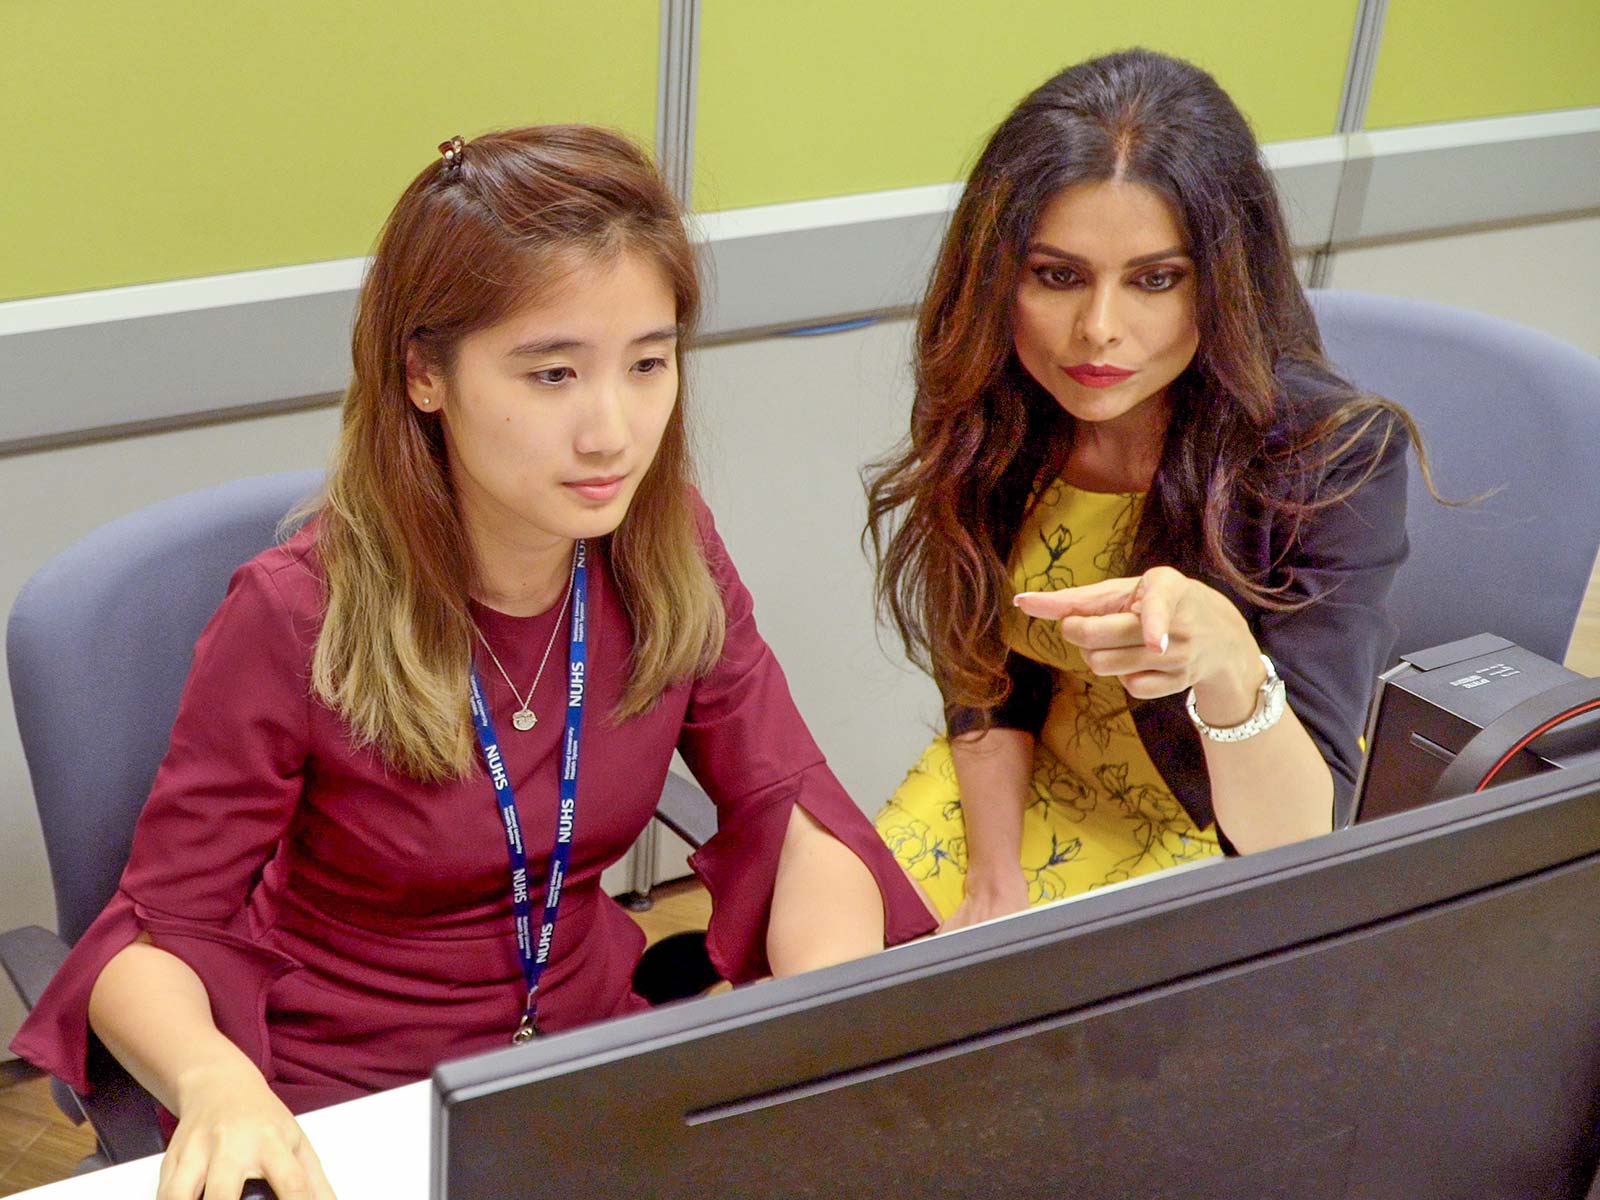 A/Prof Shefaly Shorey (right) and research team member Debby Ng (left), discussing the results from studies conducted on the Supportive Parenting App.